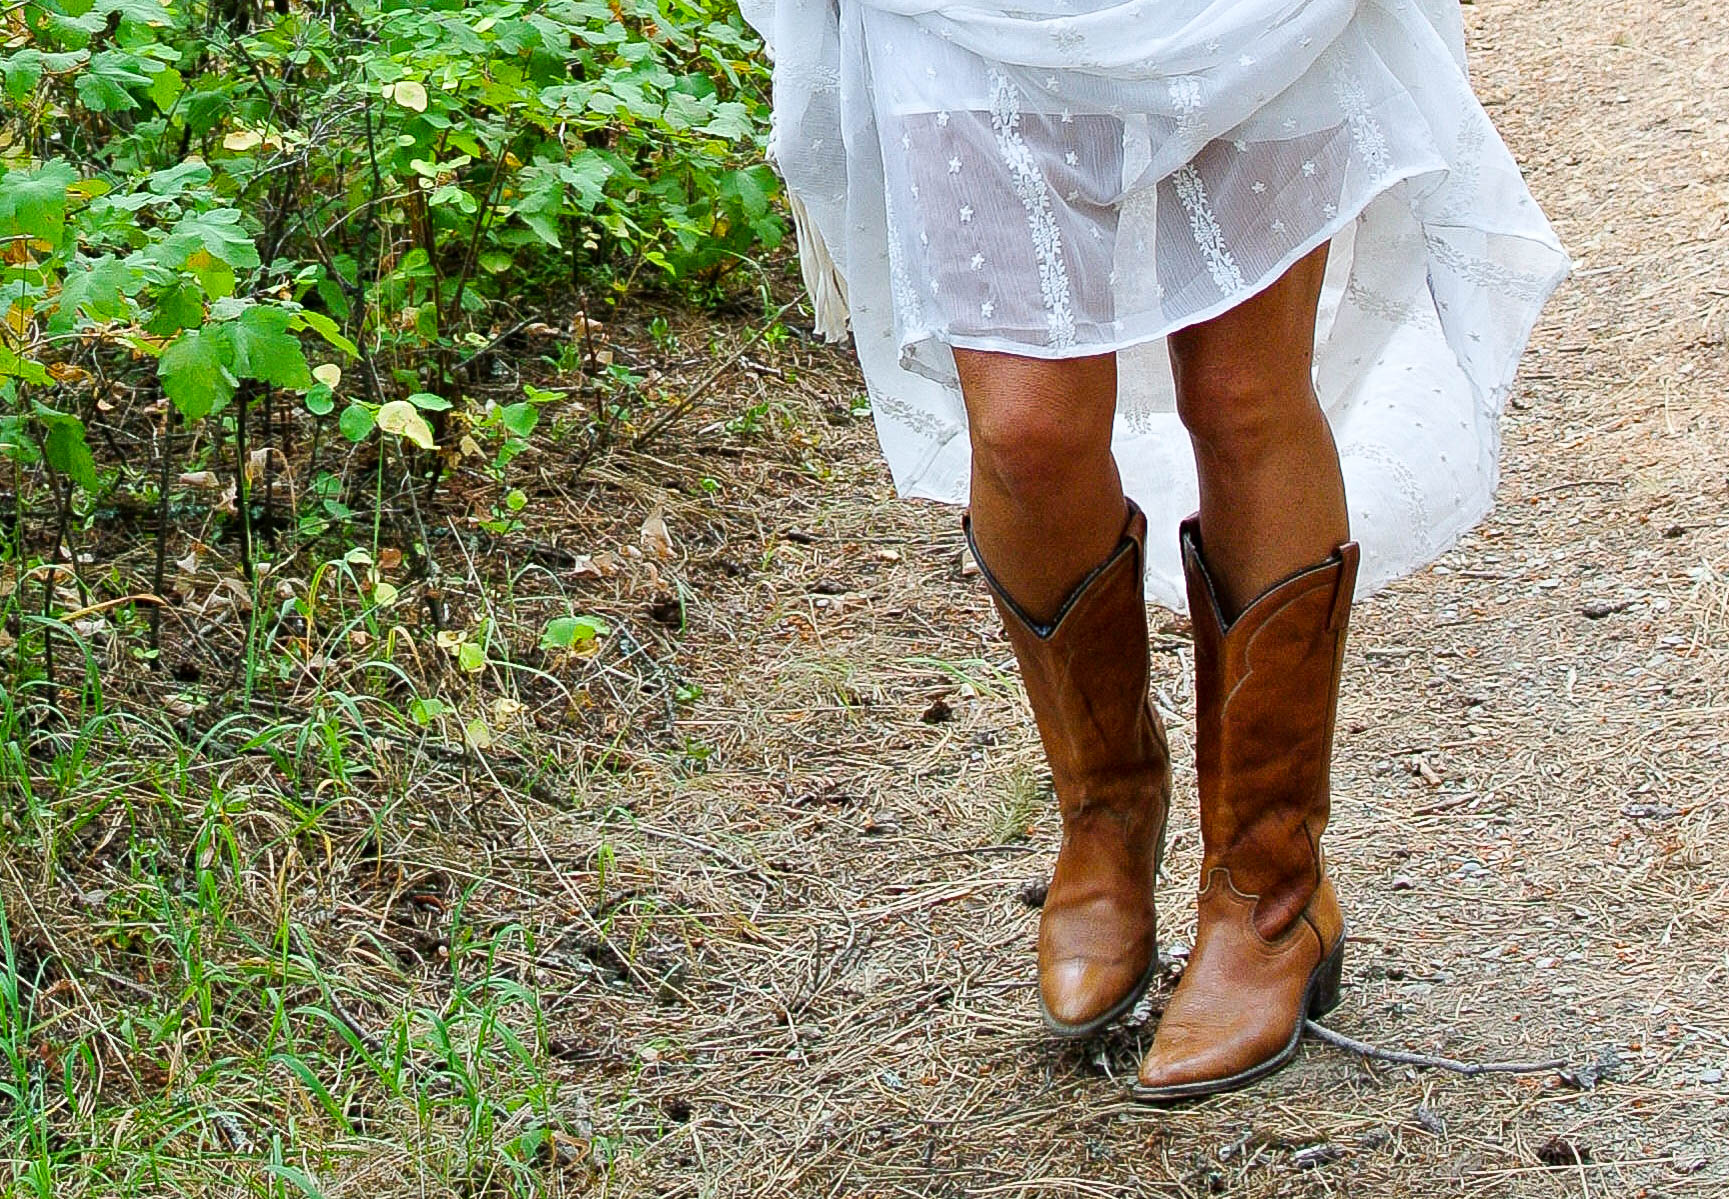 sundress and cowboy boots